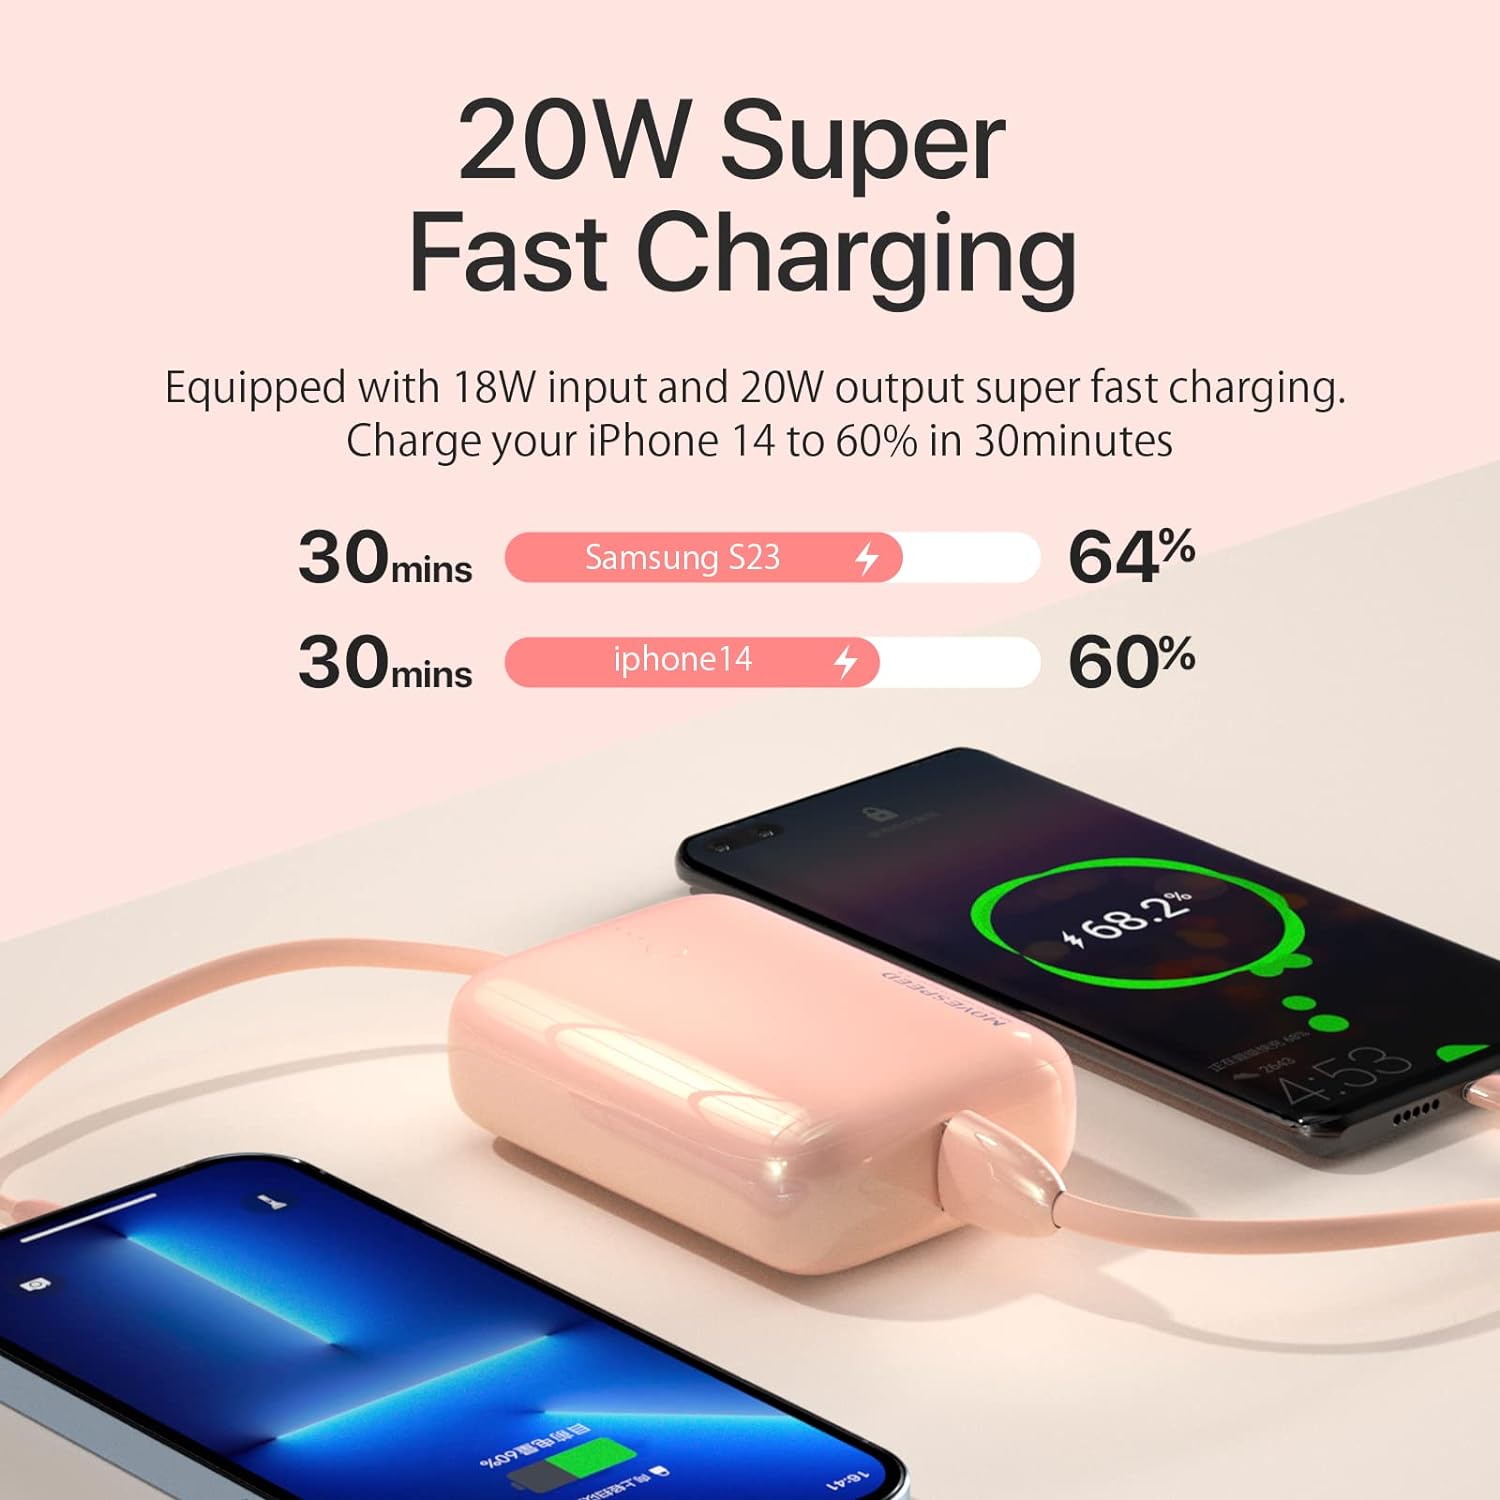 MOVE SPEED 10000mAh Portable Charger Mini Cute for Girls, PD20W Fast Charging QC3.0 External Battery Pack, Mini-Size 180g, Power Bank for iPhone, Samsung Galaxy, Android Phone, iPad,iWatch, Purple - MOVESPEED